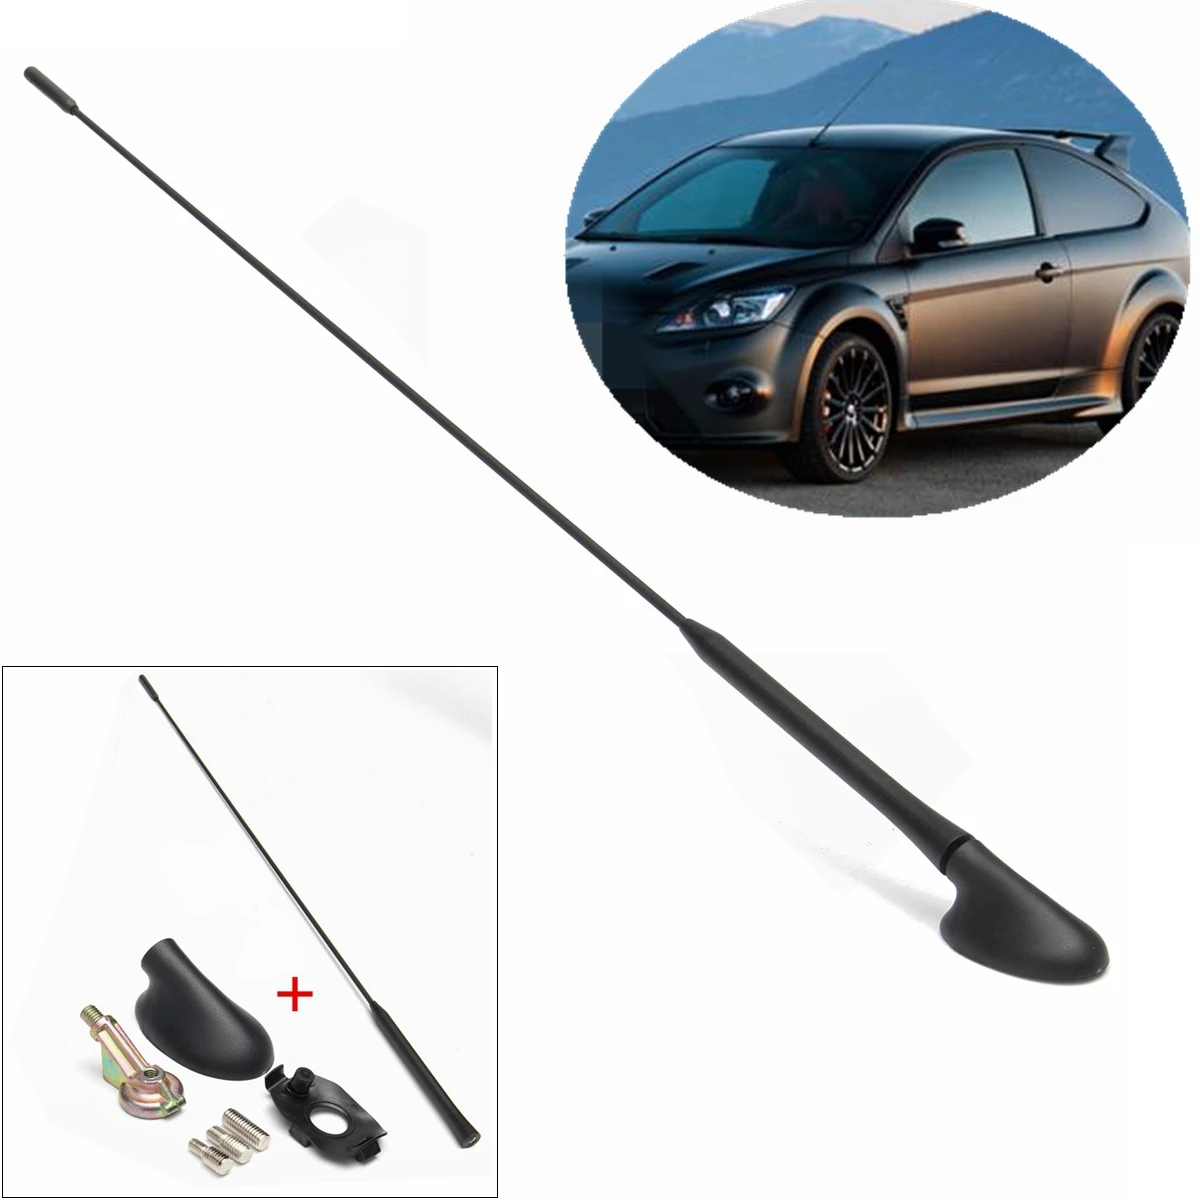 

AM/FM Car Radio Roof Antenna Aerials Mast + Base Kit For Ford For Focus Models 2000-2007 XS8Z-18919-AA XS8Z18919AA